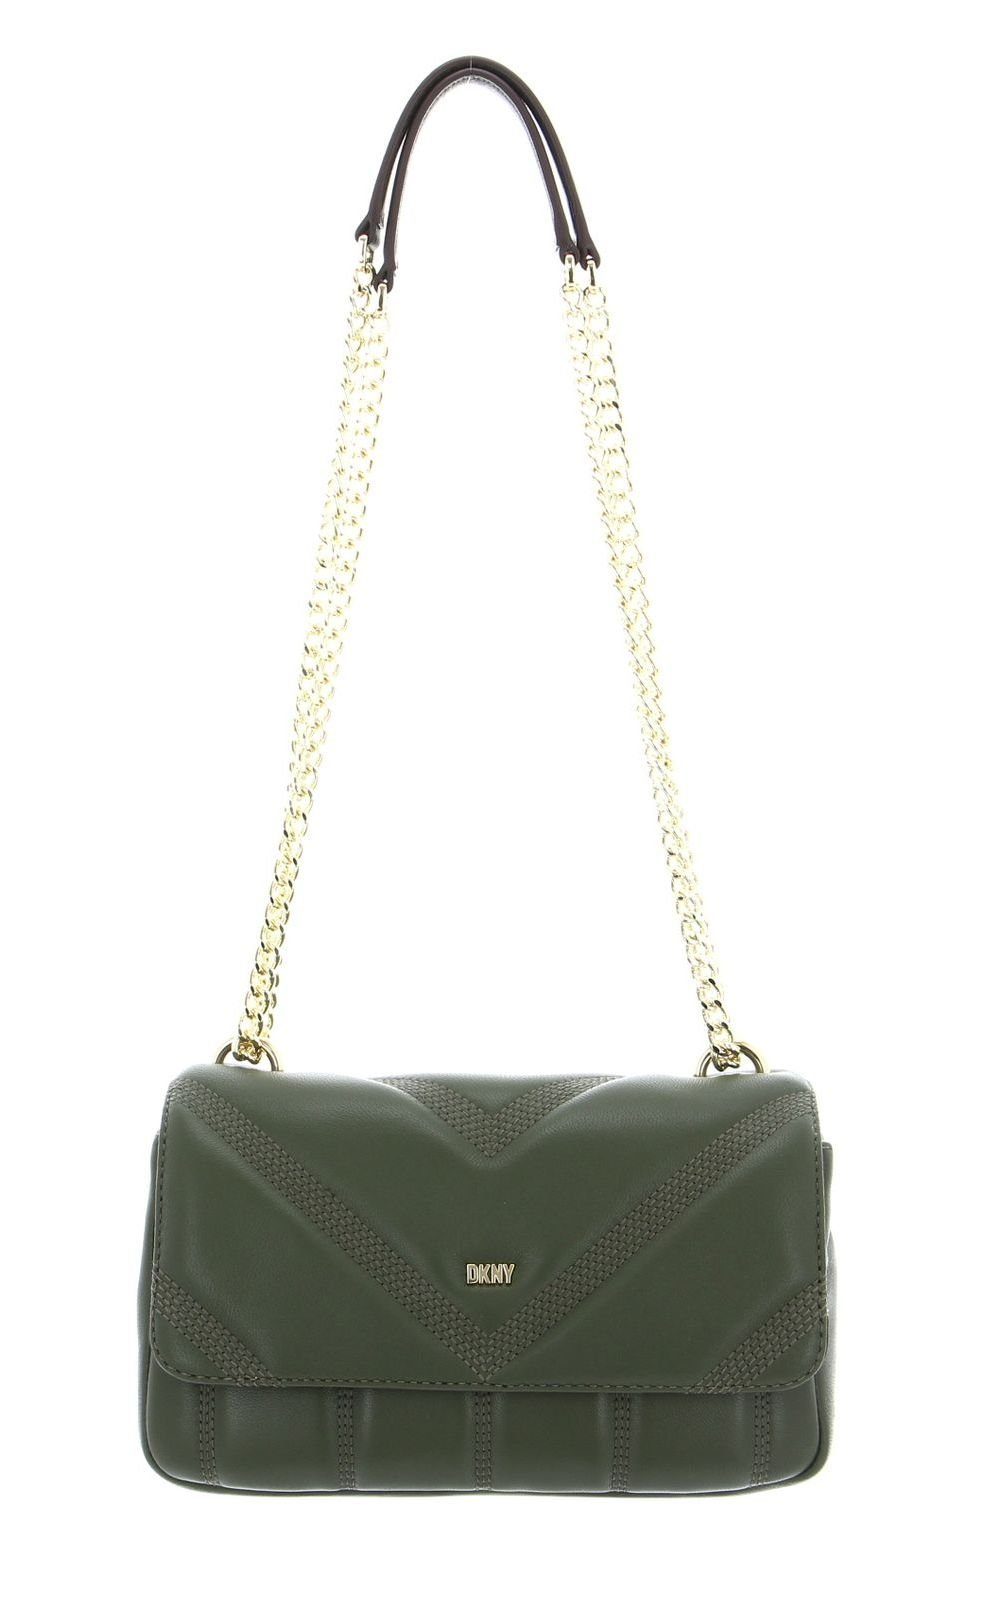 DKNY Schultertasche Becca Army Green